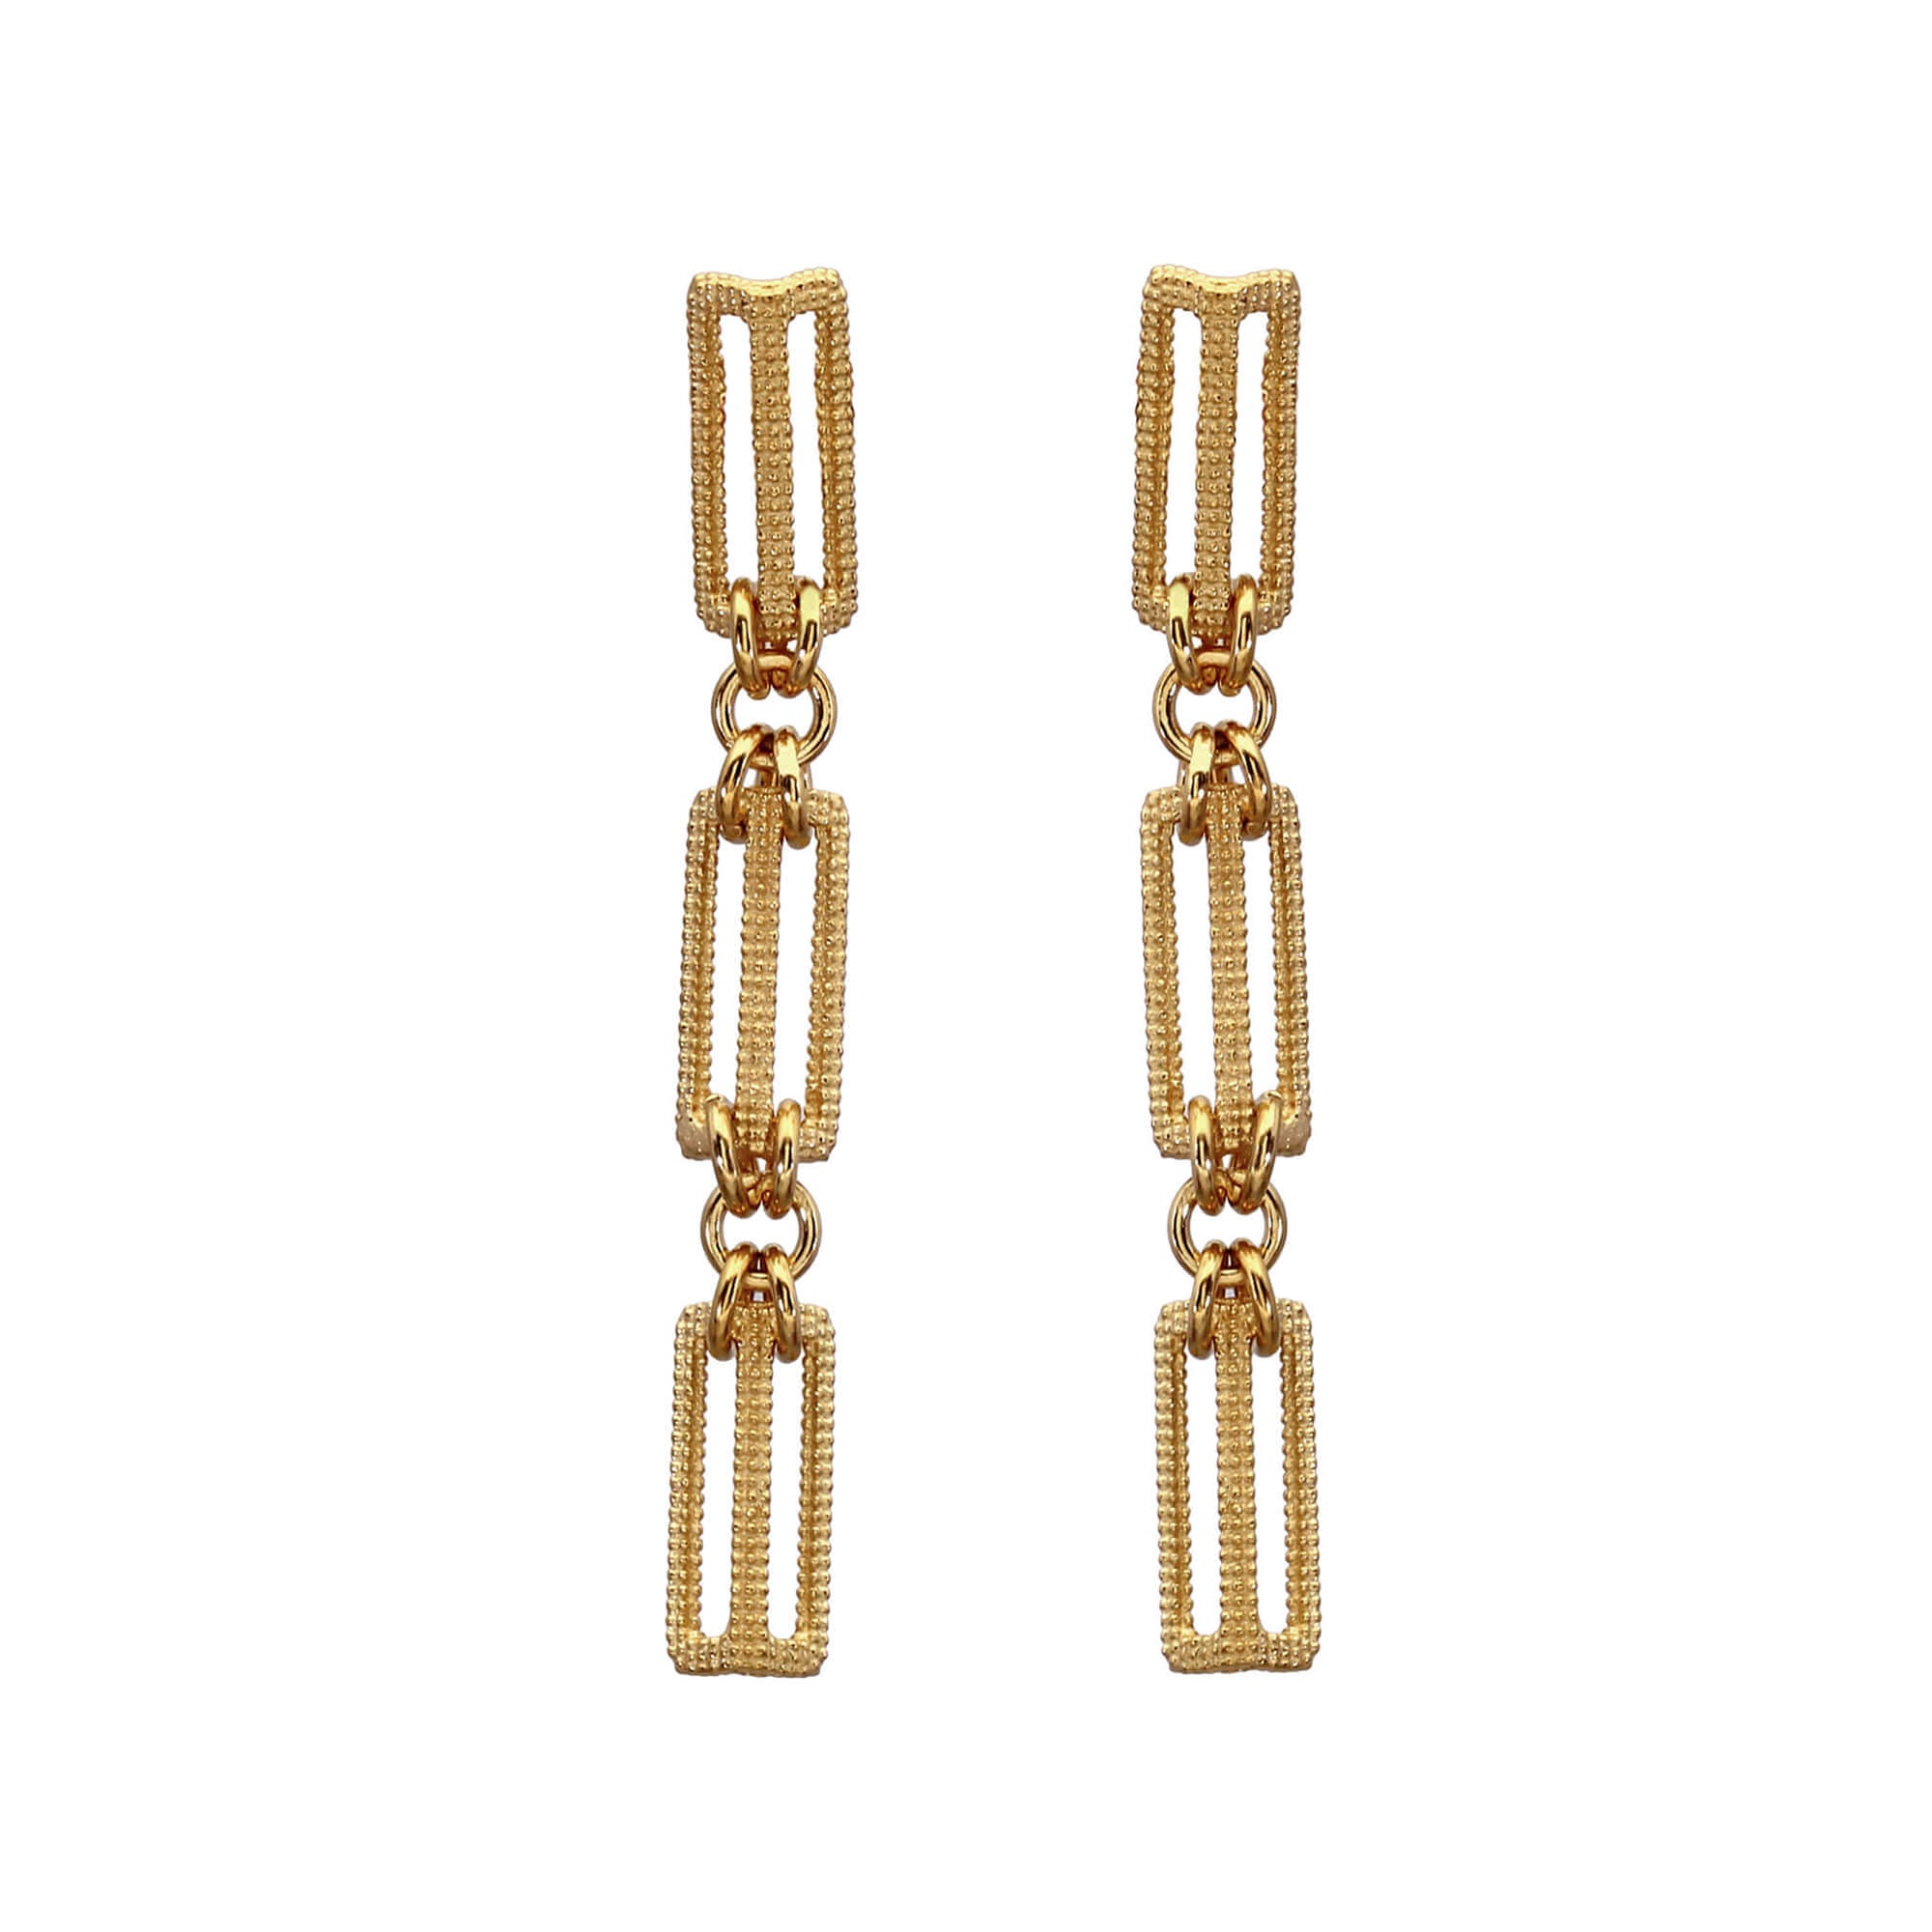 The 3 links of the Maxilla chain link earrings in yellow gold